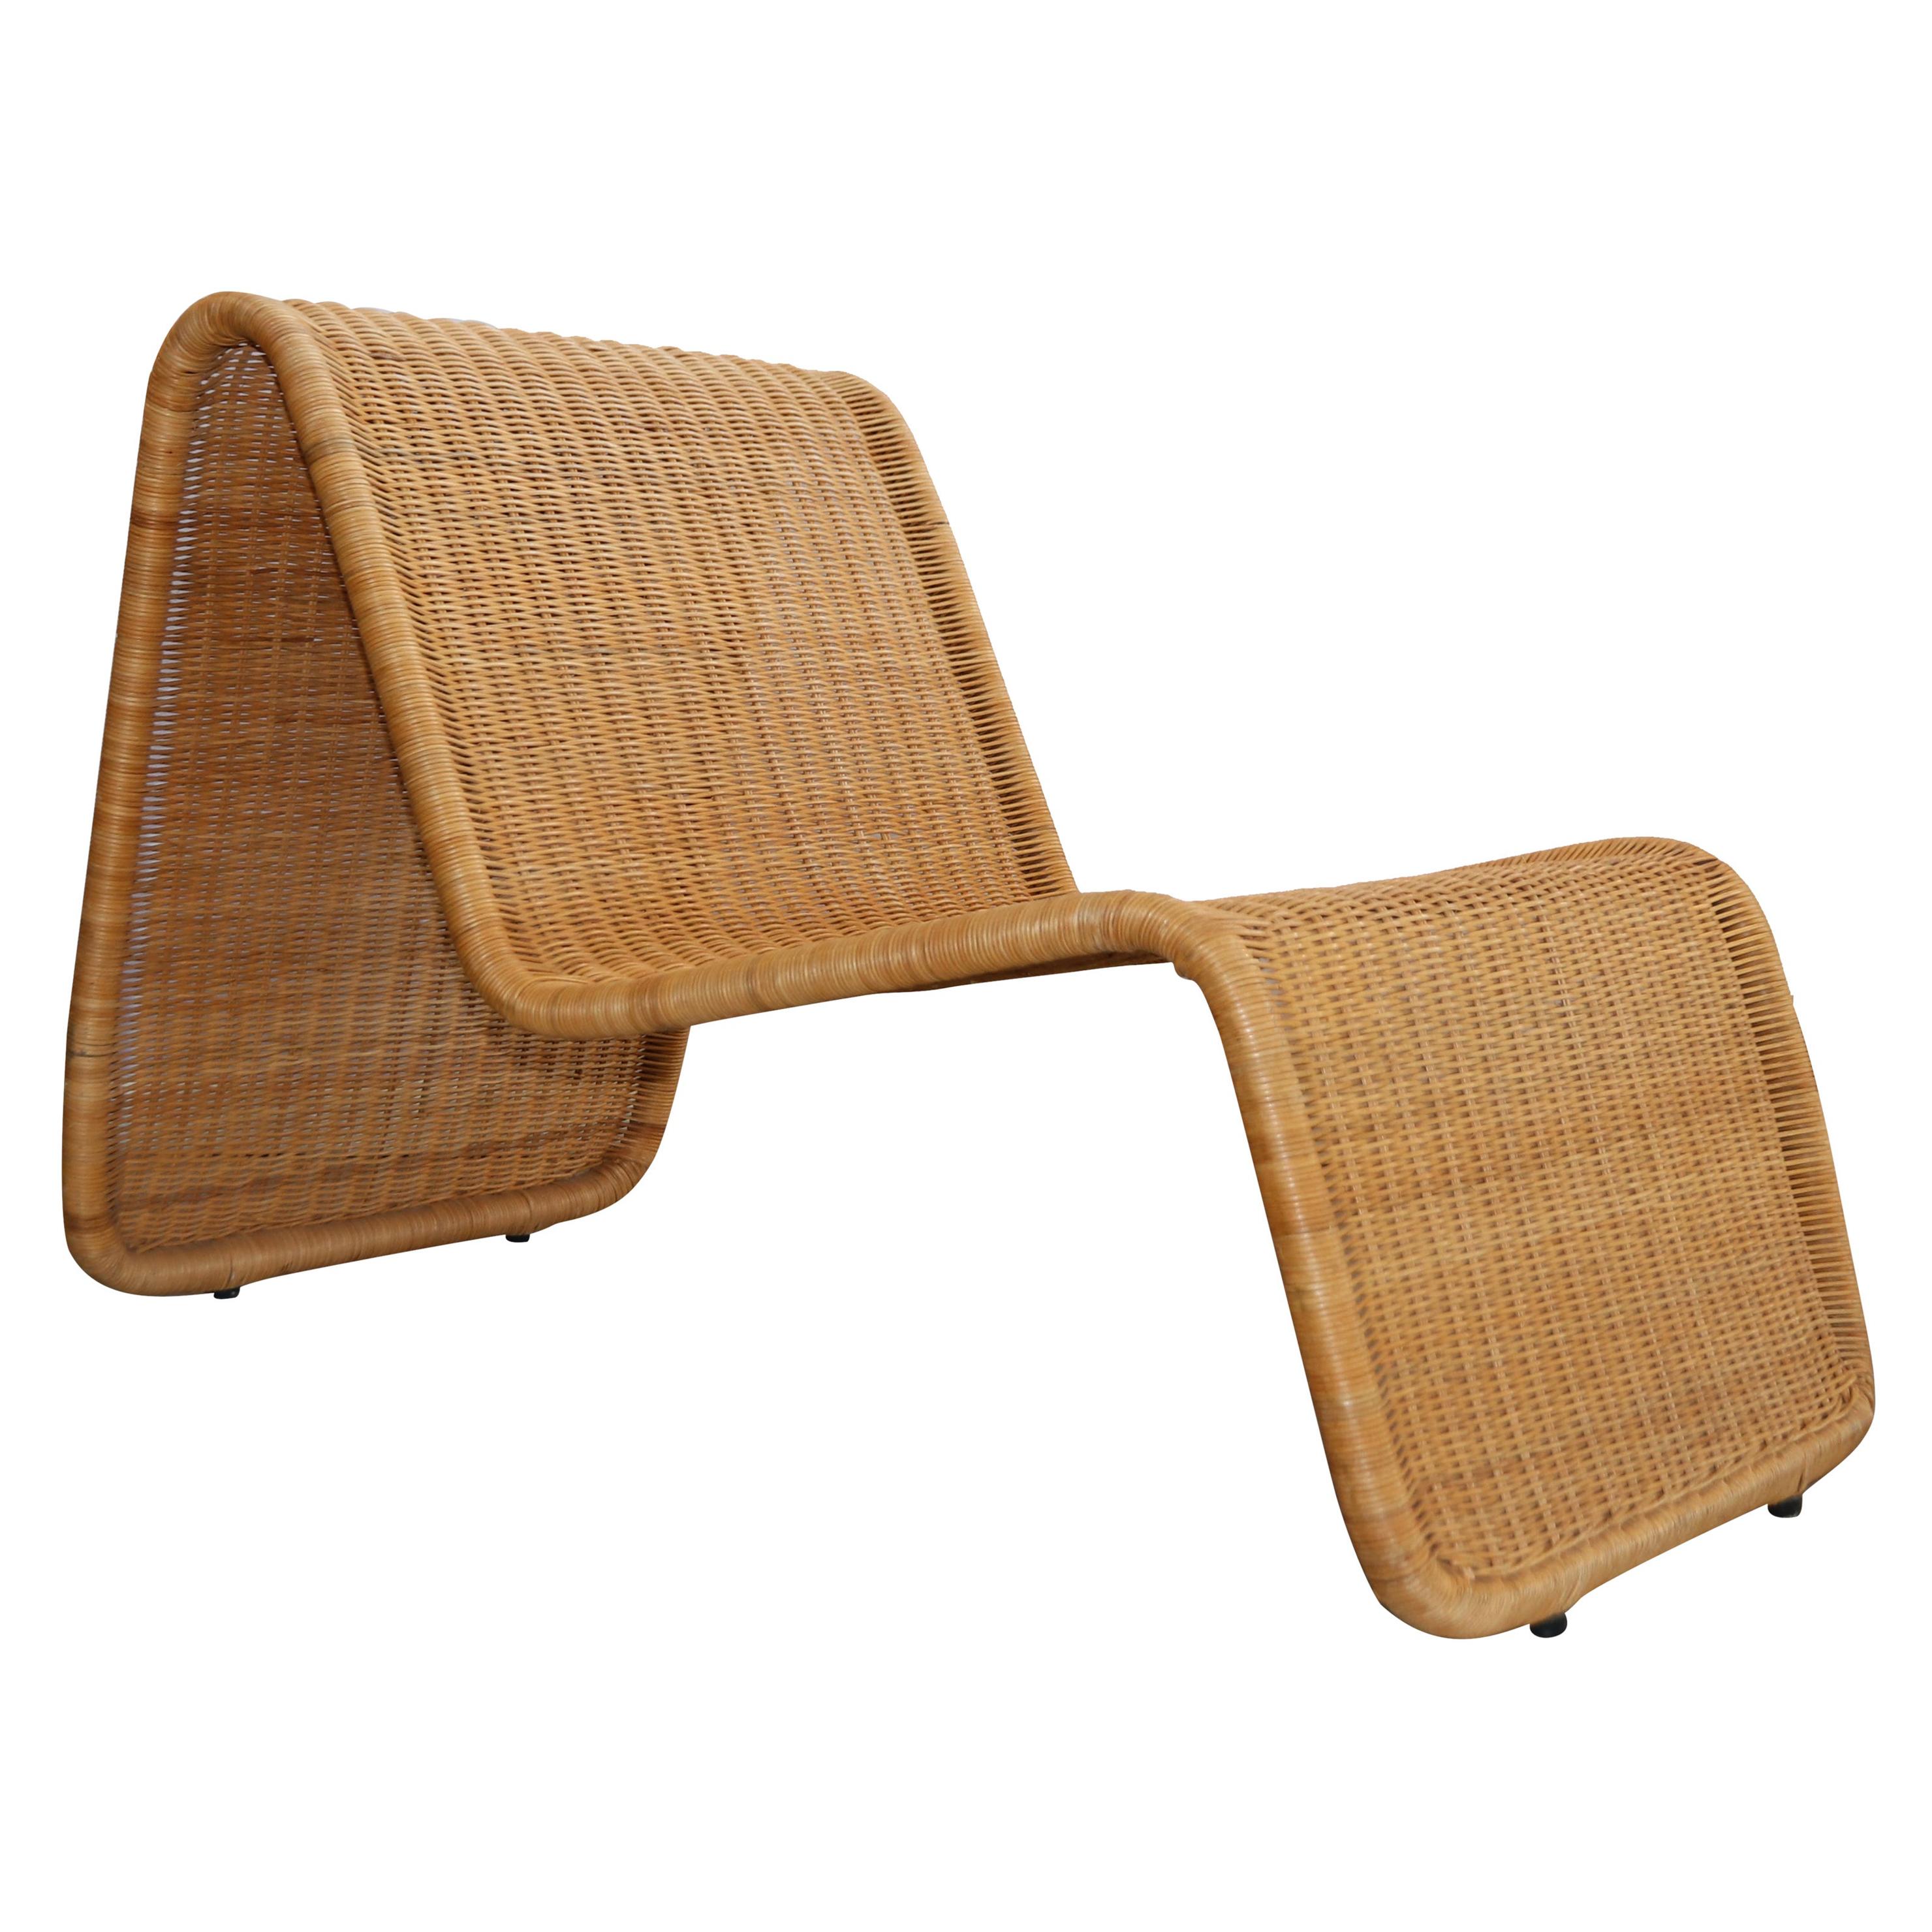 Tito Agnoli P4 Rattan Easy or Lounge Outdoor Chaise Longue Chair, 1960s